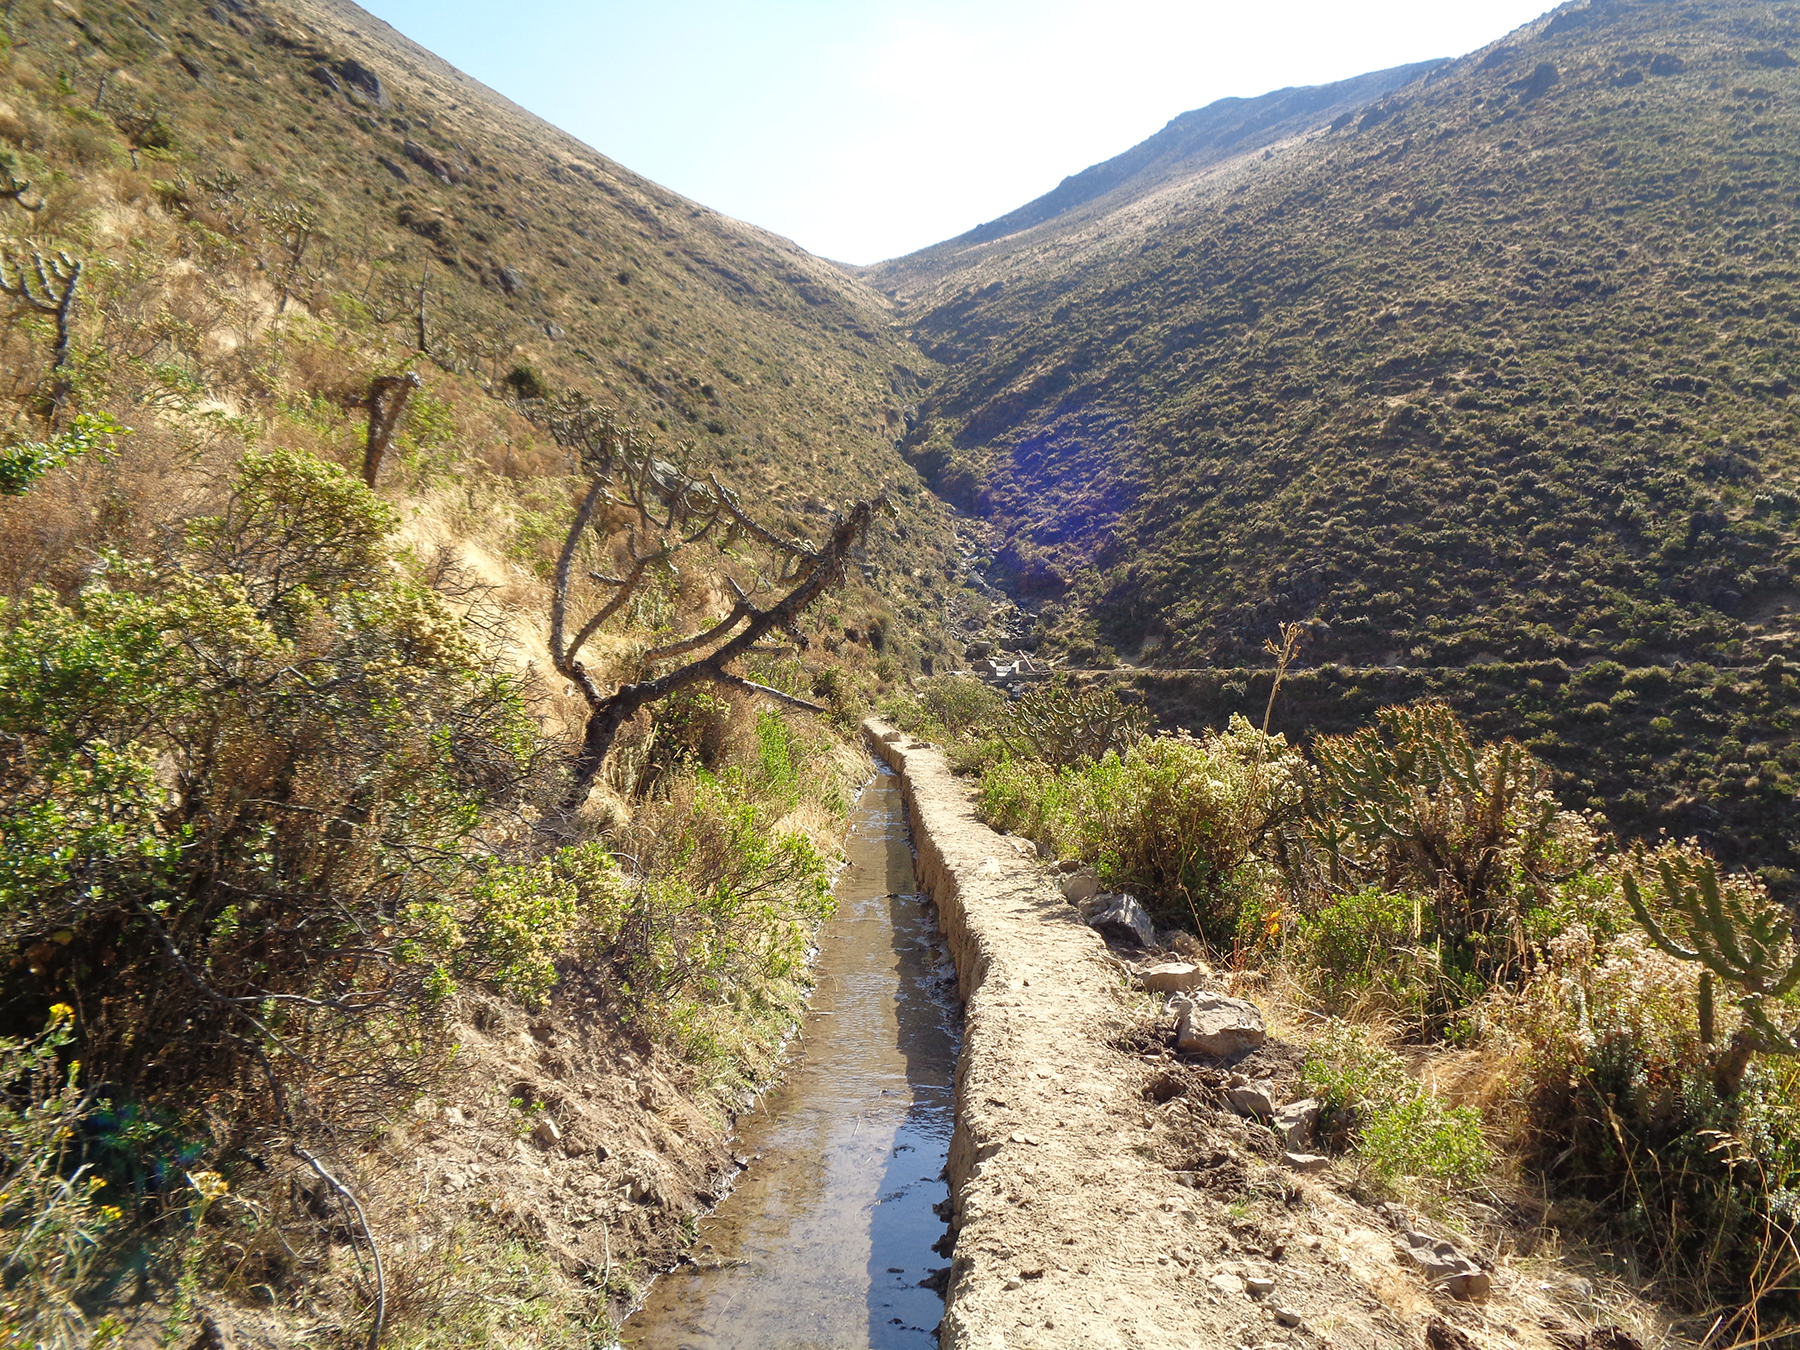 This 8.4 km long infiltration channel in the Andes Mountains is one of the nearly two dozen amunas that have been rehabilitated by Aquafondo. (Image Courtesy of Aquafondo)